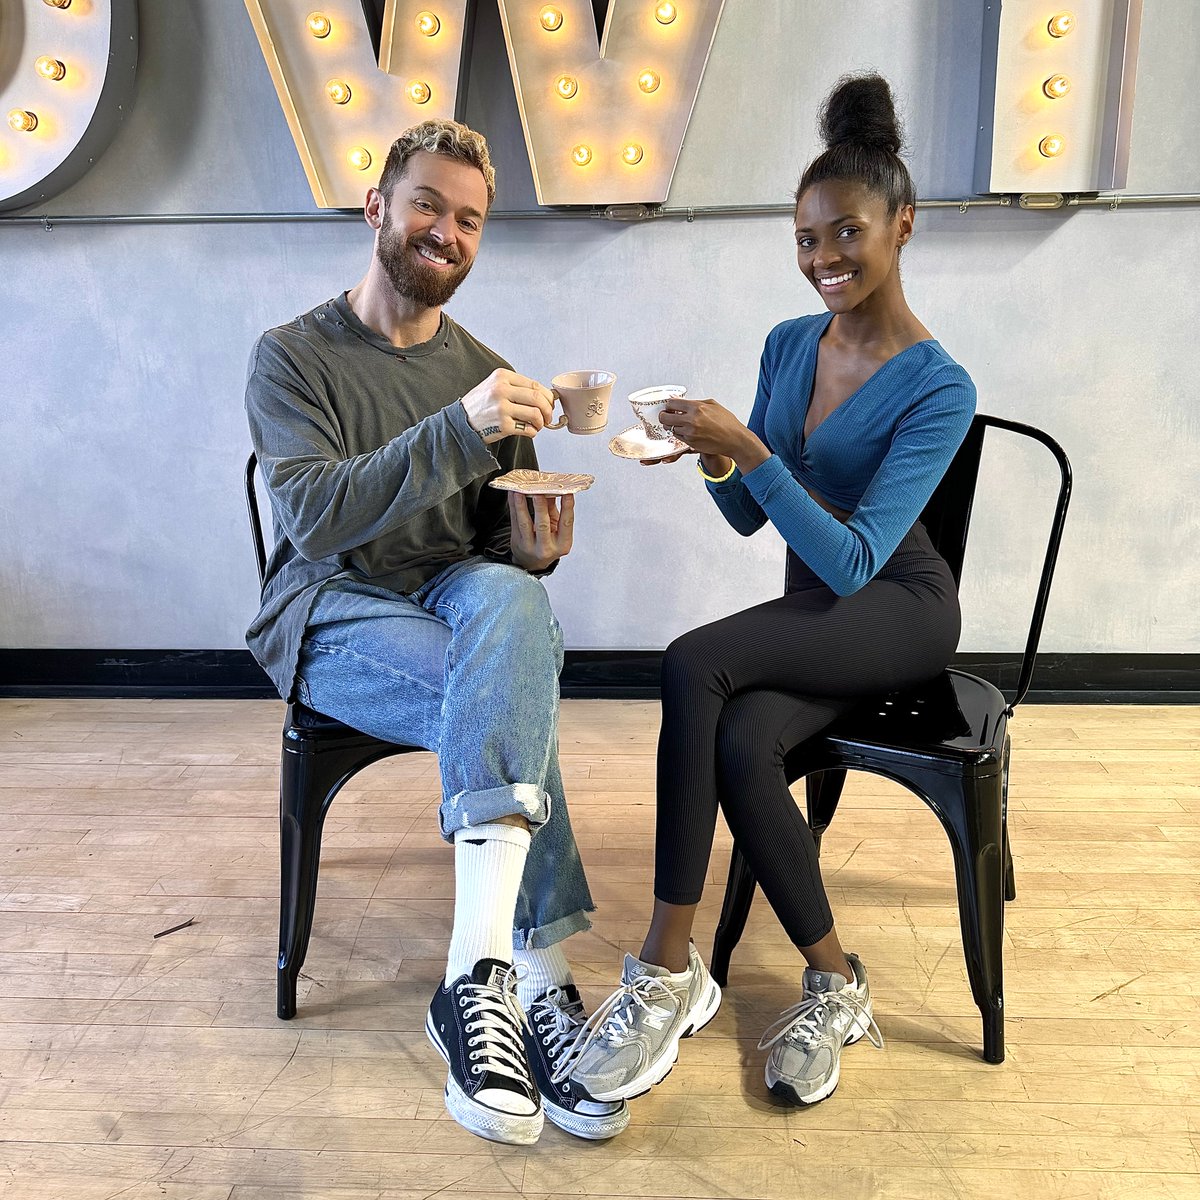 Cheers to @charitylaws_ and @artemchigvintse's Argentine Tango for A Celebration of Taylor Swift on #DWTS! ☕️ #DWTSxTaylorSwift @taylorswift13